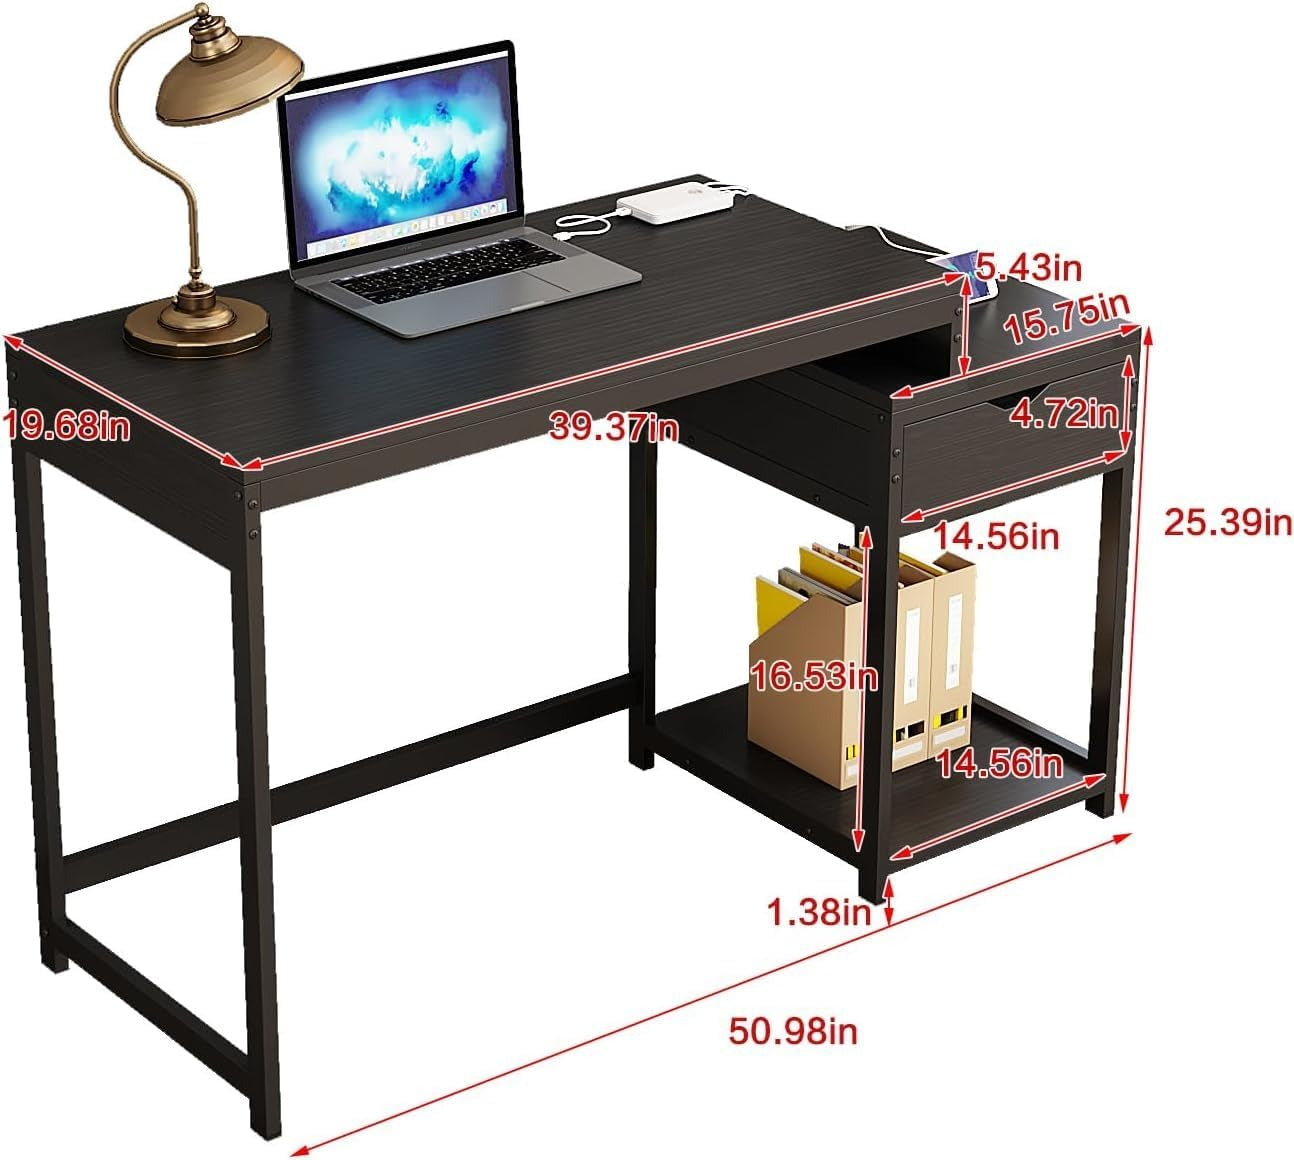 51" Workspace with Power Outlet, USB Charging Port size introduction